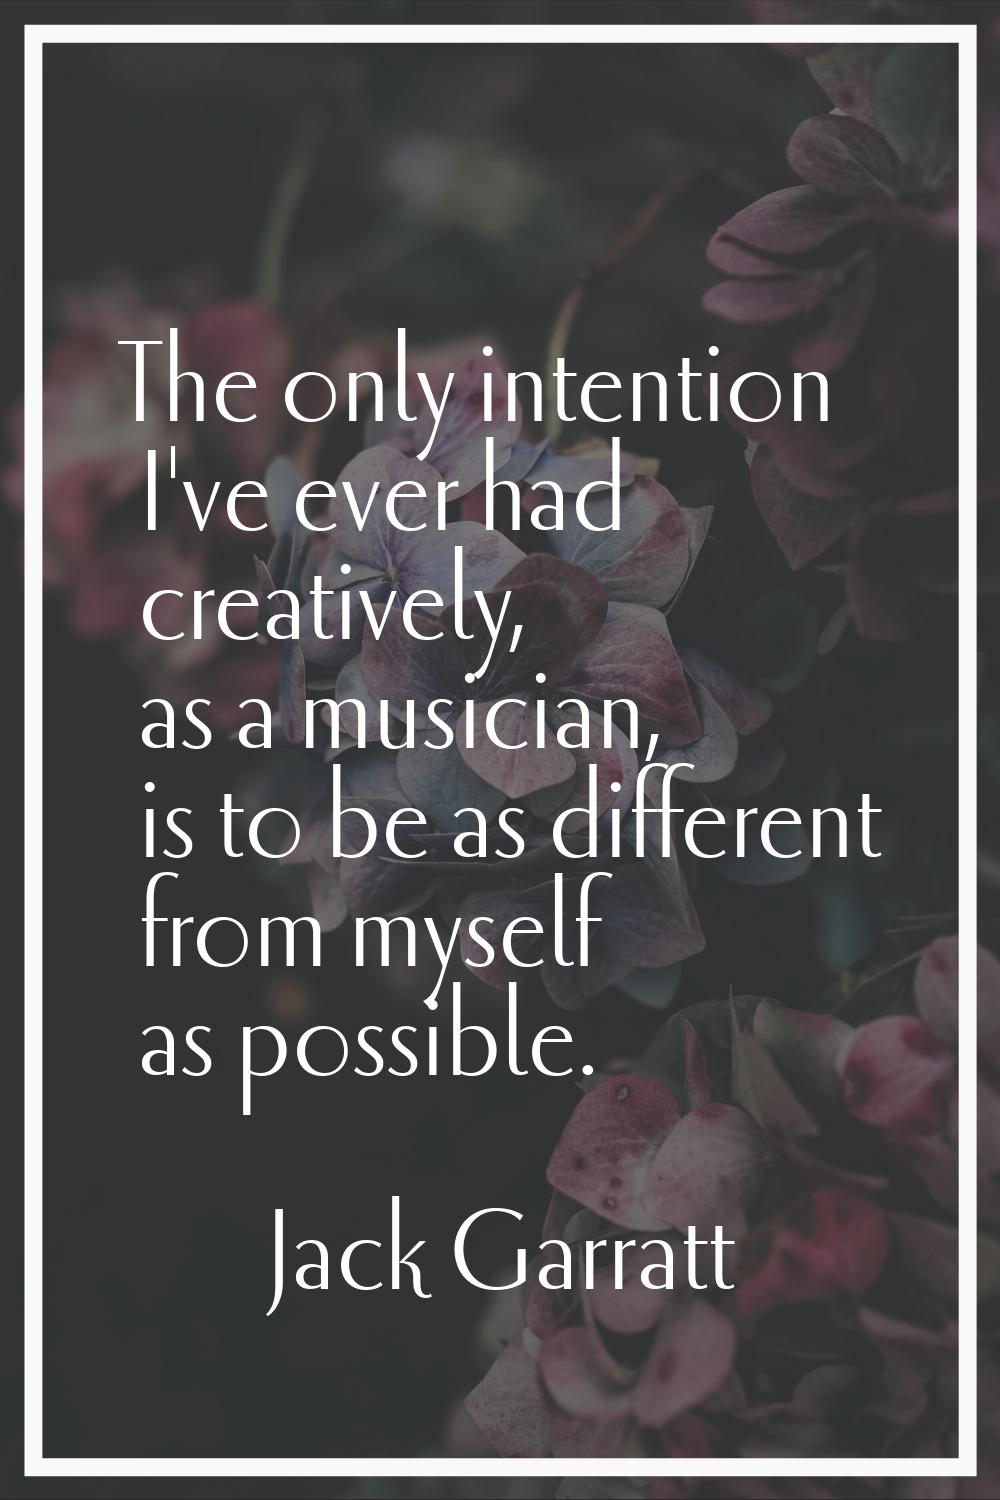 The only intention I've ever had creatively, as a musician, is to be as different from myself as po